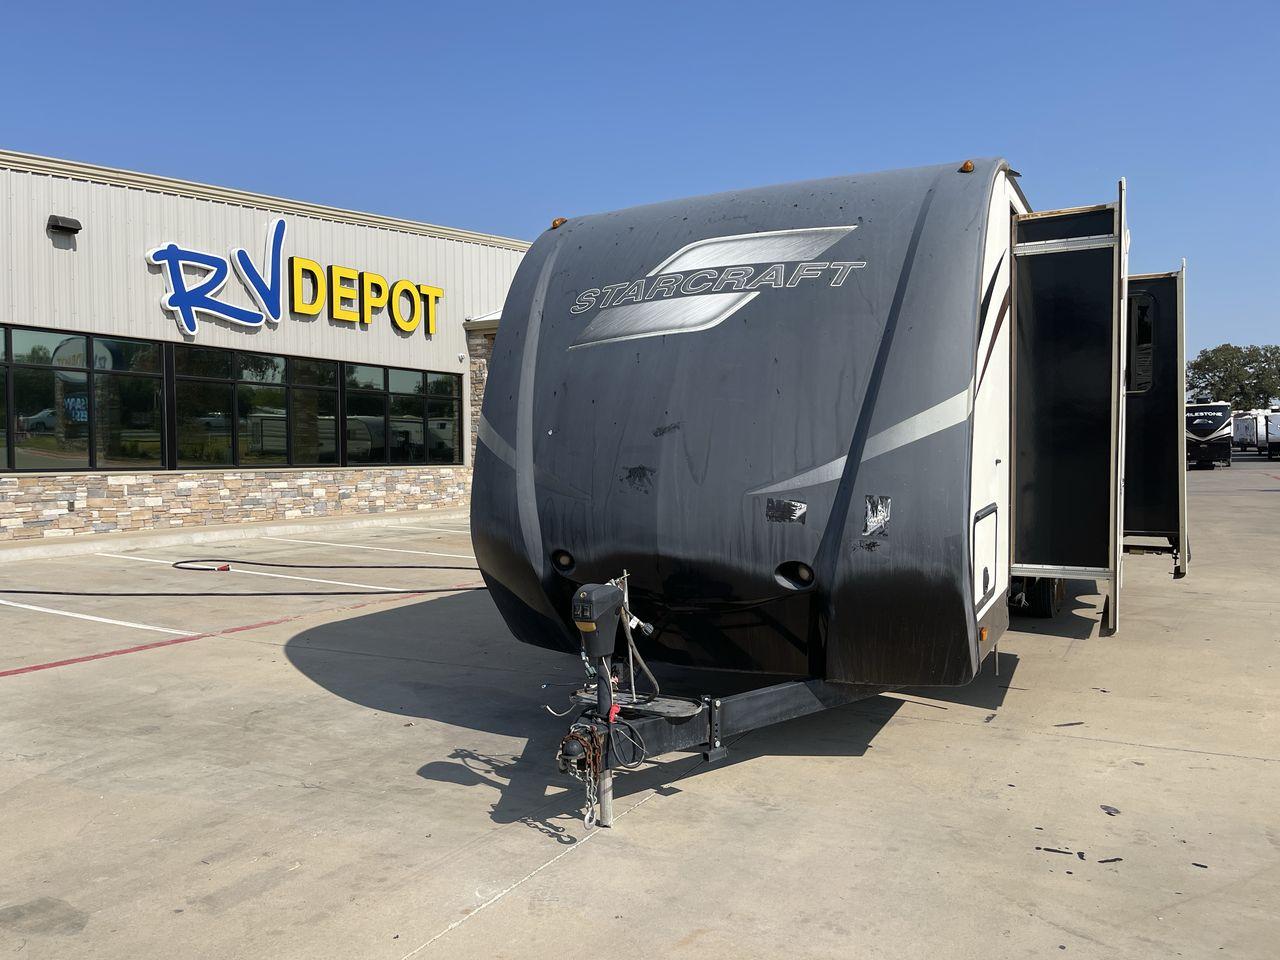 2015 STARCRAFT TRAVEL STAR 286RLWS (1SABS0BR2F2) , Length: 33.25 ft. | Dry Weight: 6,630 lbs. | Gross Weight: 9,000 lbs. | Slides: 2 transmission, located at 4319 N Main St, Cleburne, TX, 76033, (817) 678-5133, 32.385960, -97.391212 - With the 2015 Starcraft Travel Star 286RLWS travel trailer, experience the joys of camping. This expertly designed RV is the best option for anyone looking for unforgettable outdoor experiences since it provides the optimal balance of comfort, functionality, and family-friendly features. The dimensi - Photo #0